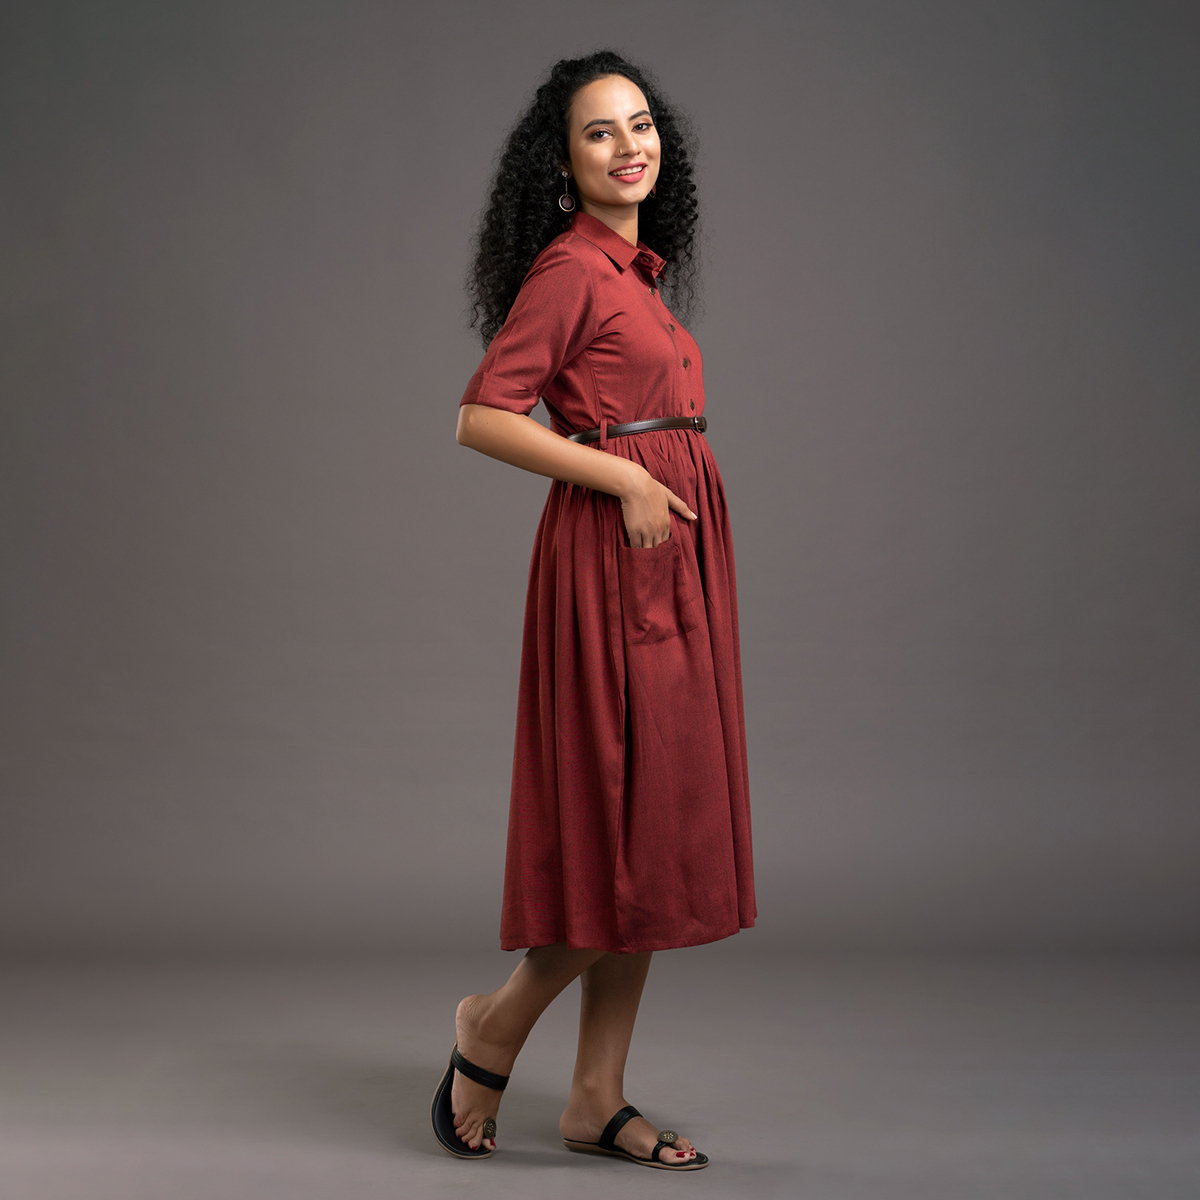 Zella Solid Color Shirt Midi Dress styled with Patch Pockets & Waist belt - Maroon